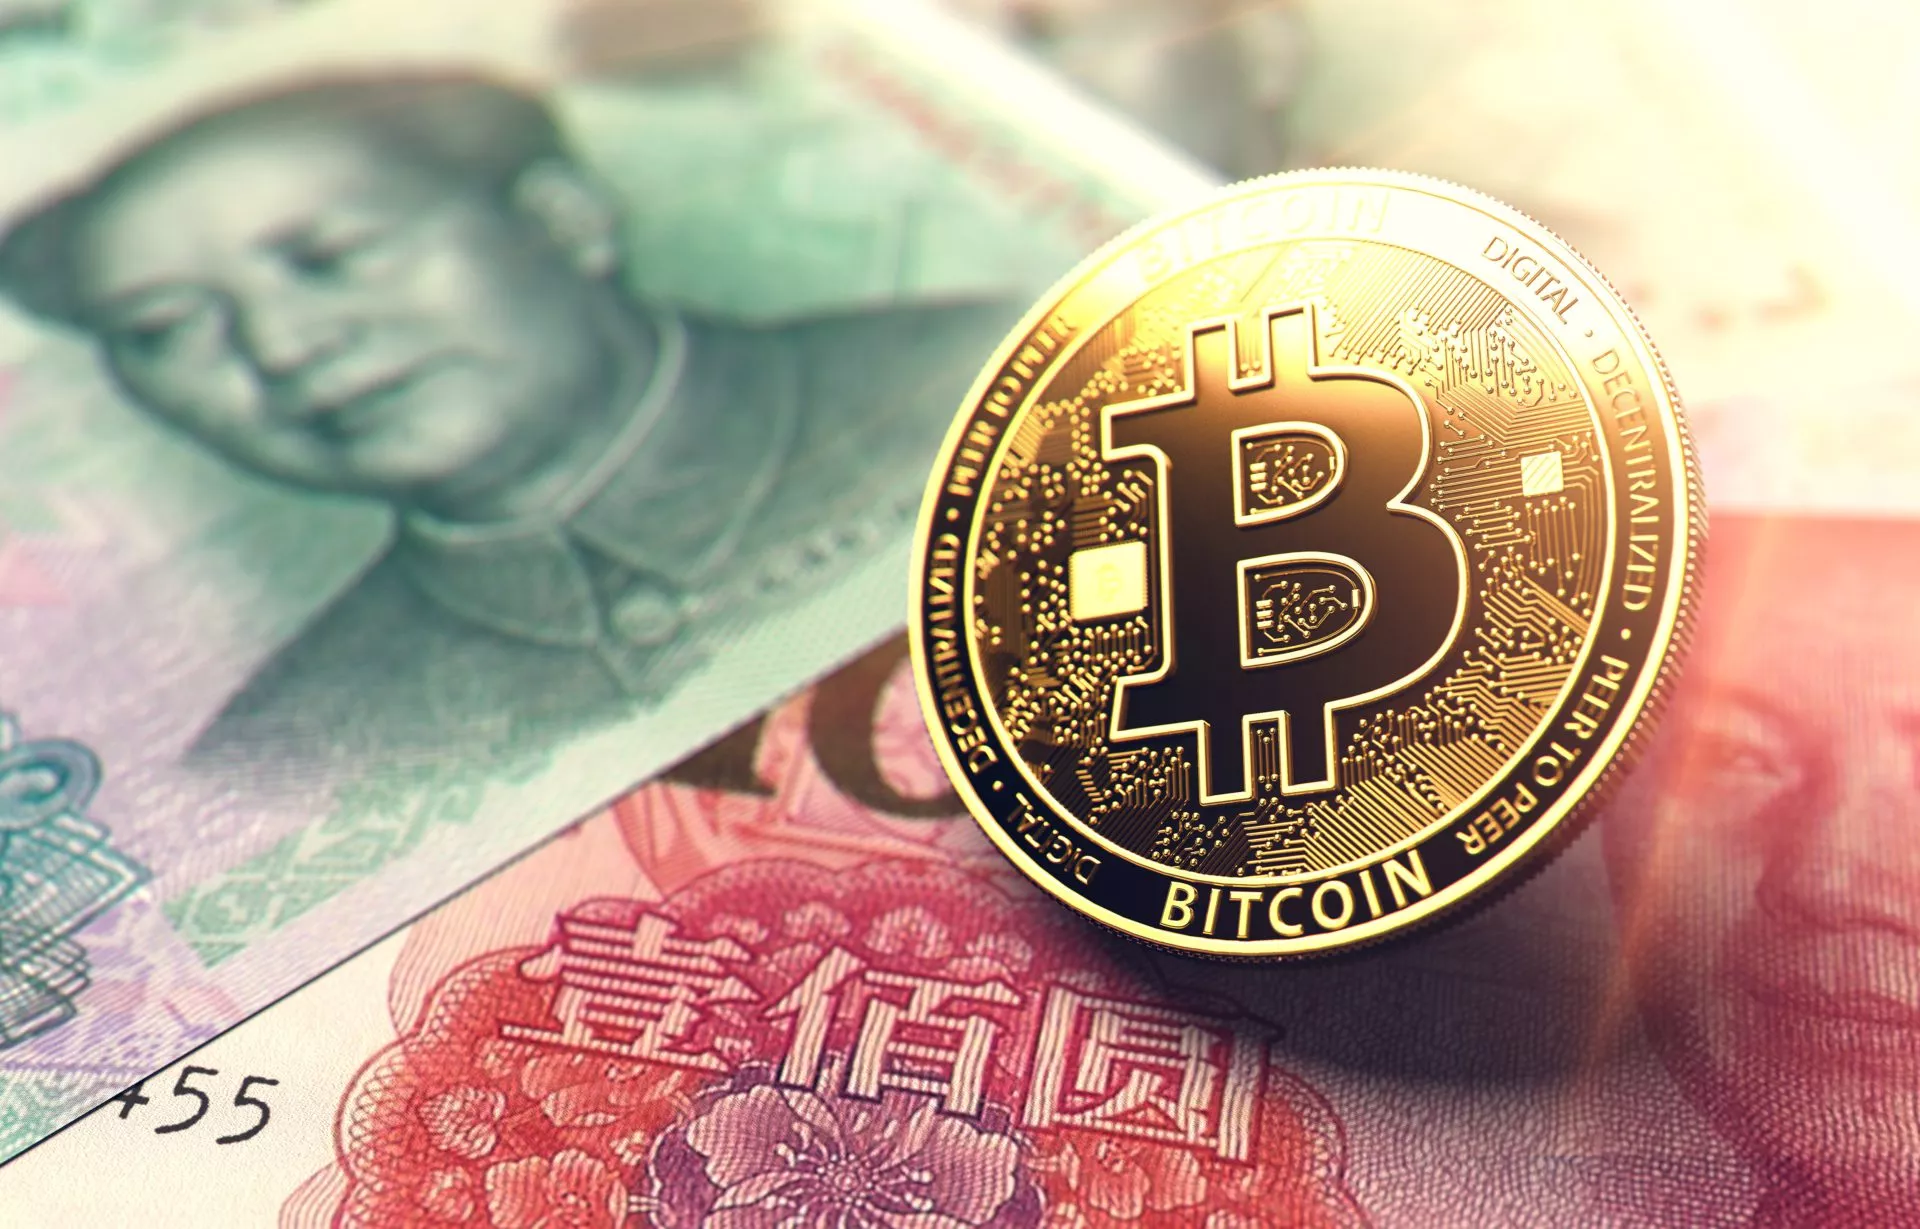 China’s cryptocurrency gaat om controle